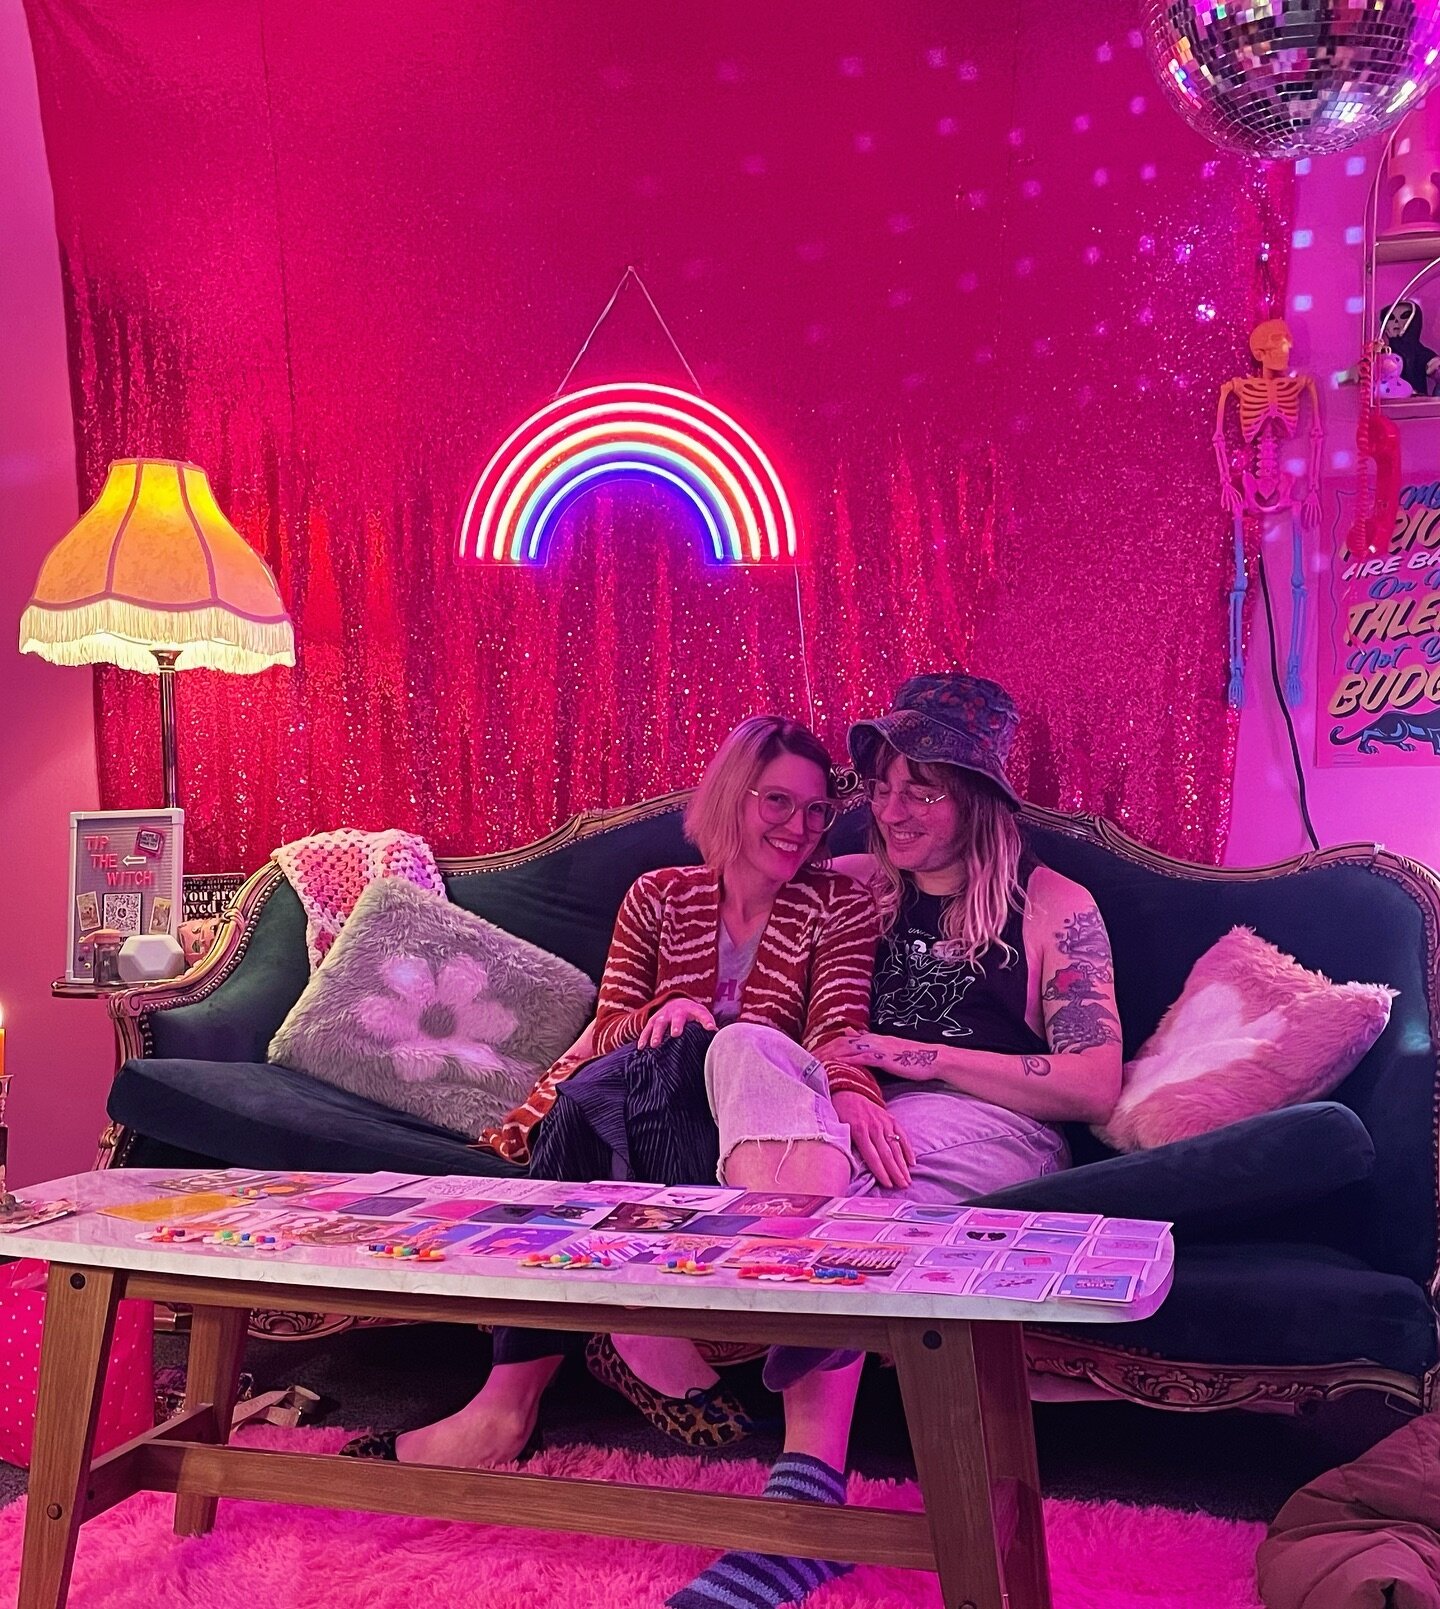 💞✨NEW✨ group readings 💞

The pink room is the dreamiest tourist attraction&hellip; 💞🌈 Folks drive for miles for a night of tarot + chill with their besties in the pink room! 💗 You need to experience the magic for yourself. Get yourself and the p